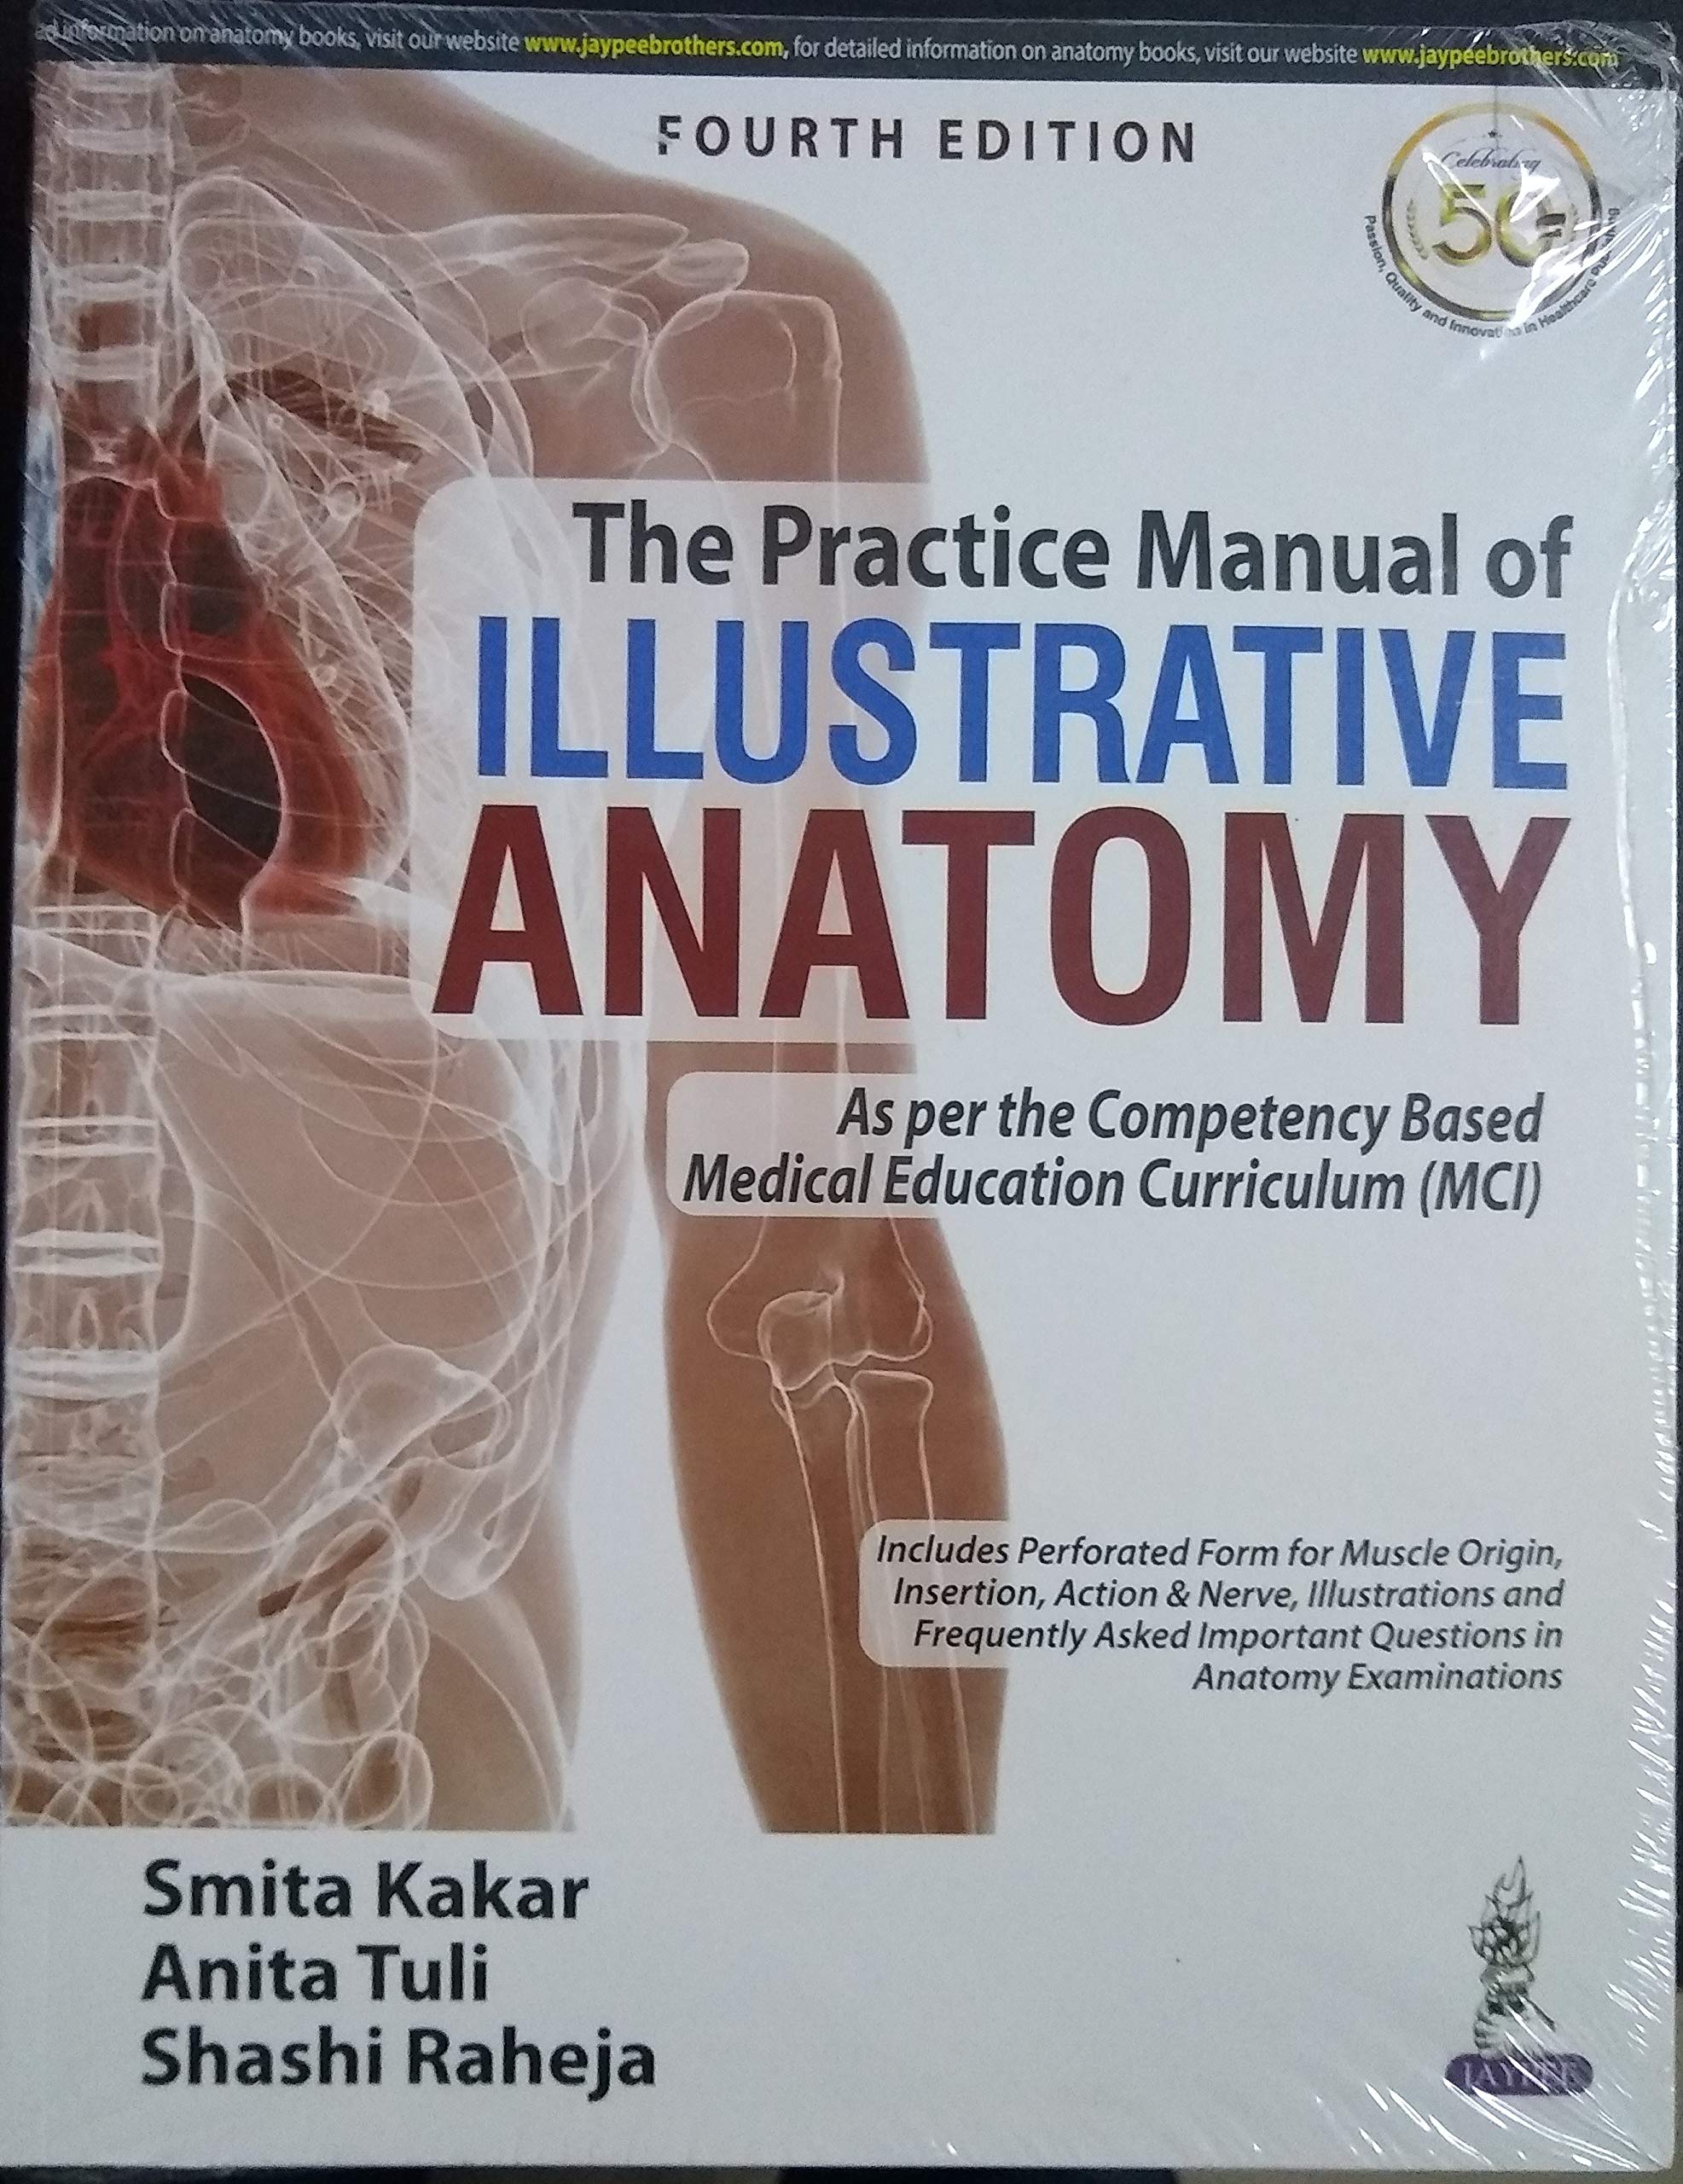 The Practice Manual of Illustrative Anatomy 4th Edition 2021